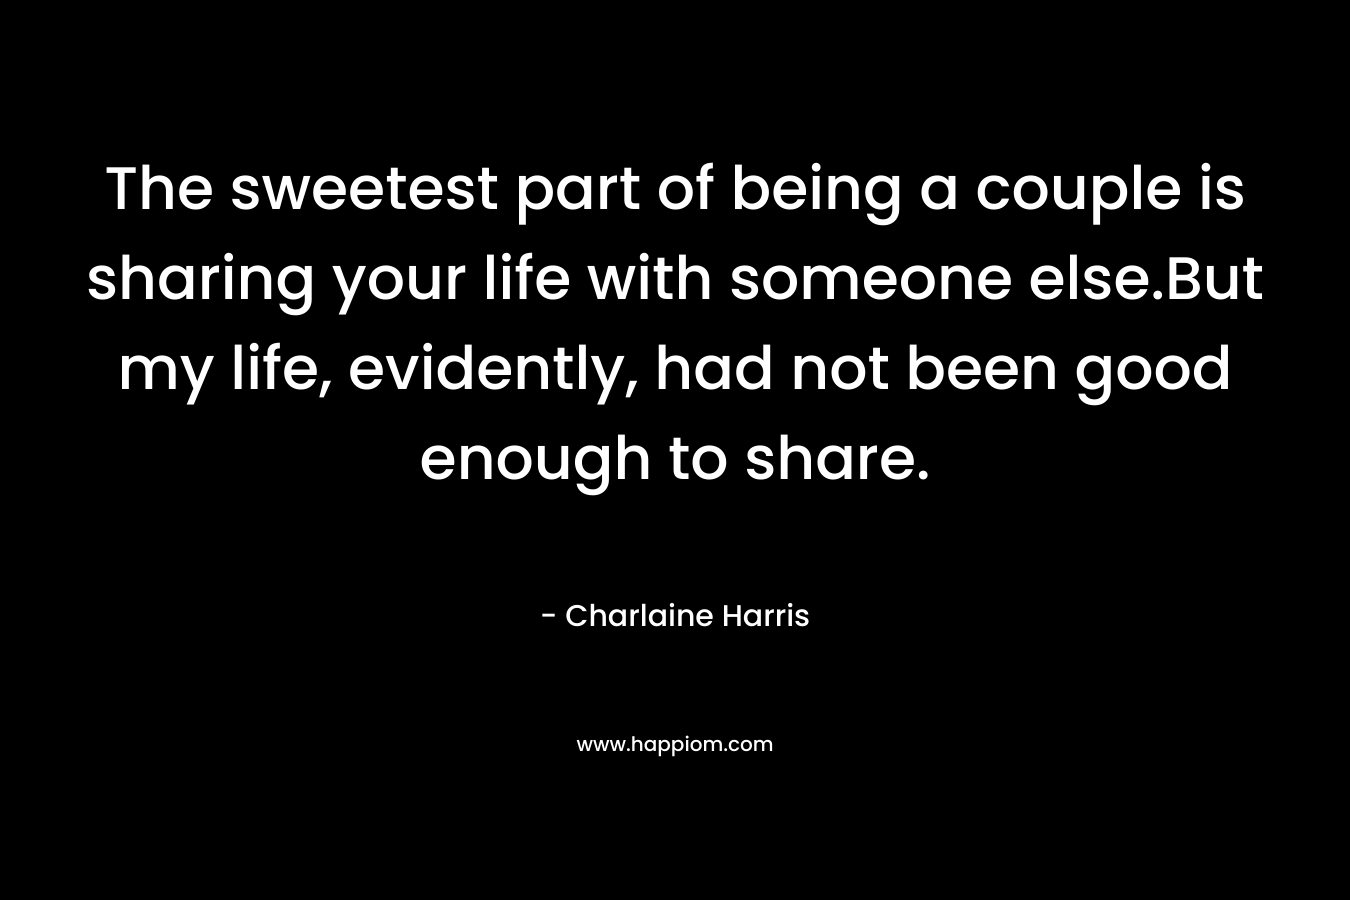 The sweetest part of being a couple is sharing your life with someone else.But my life, evidently, had not been good enough to share. – Charlaine Harris